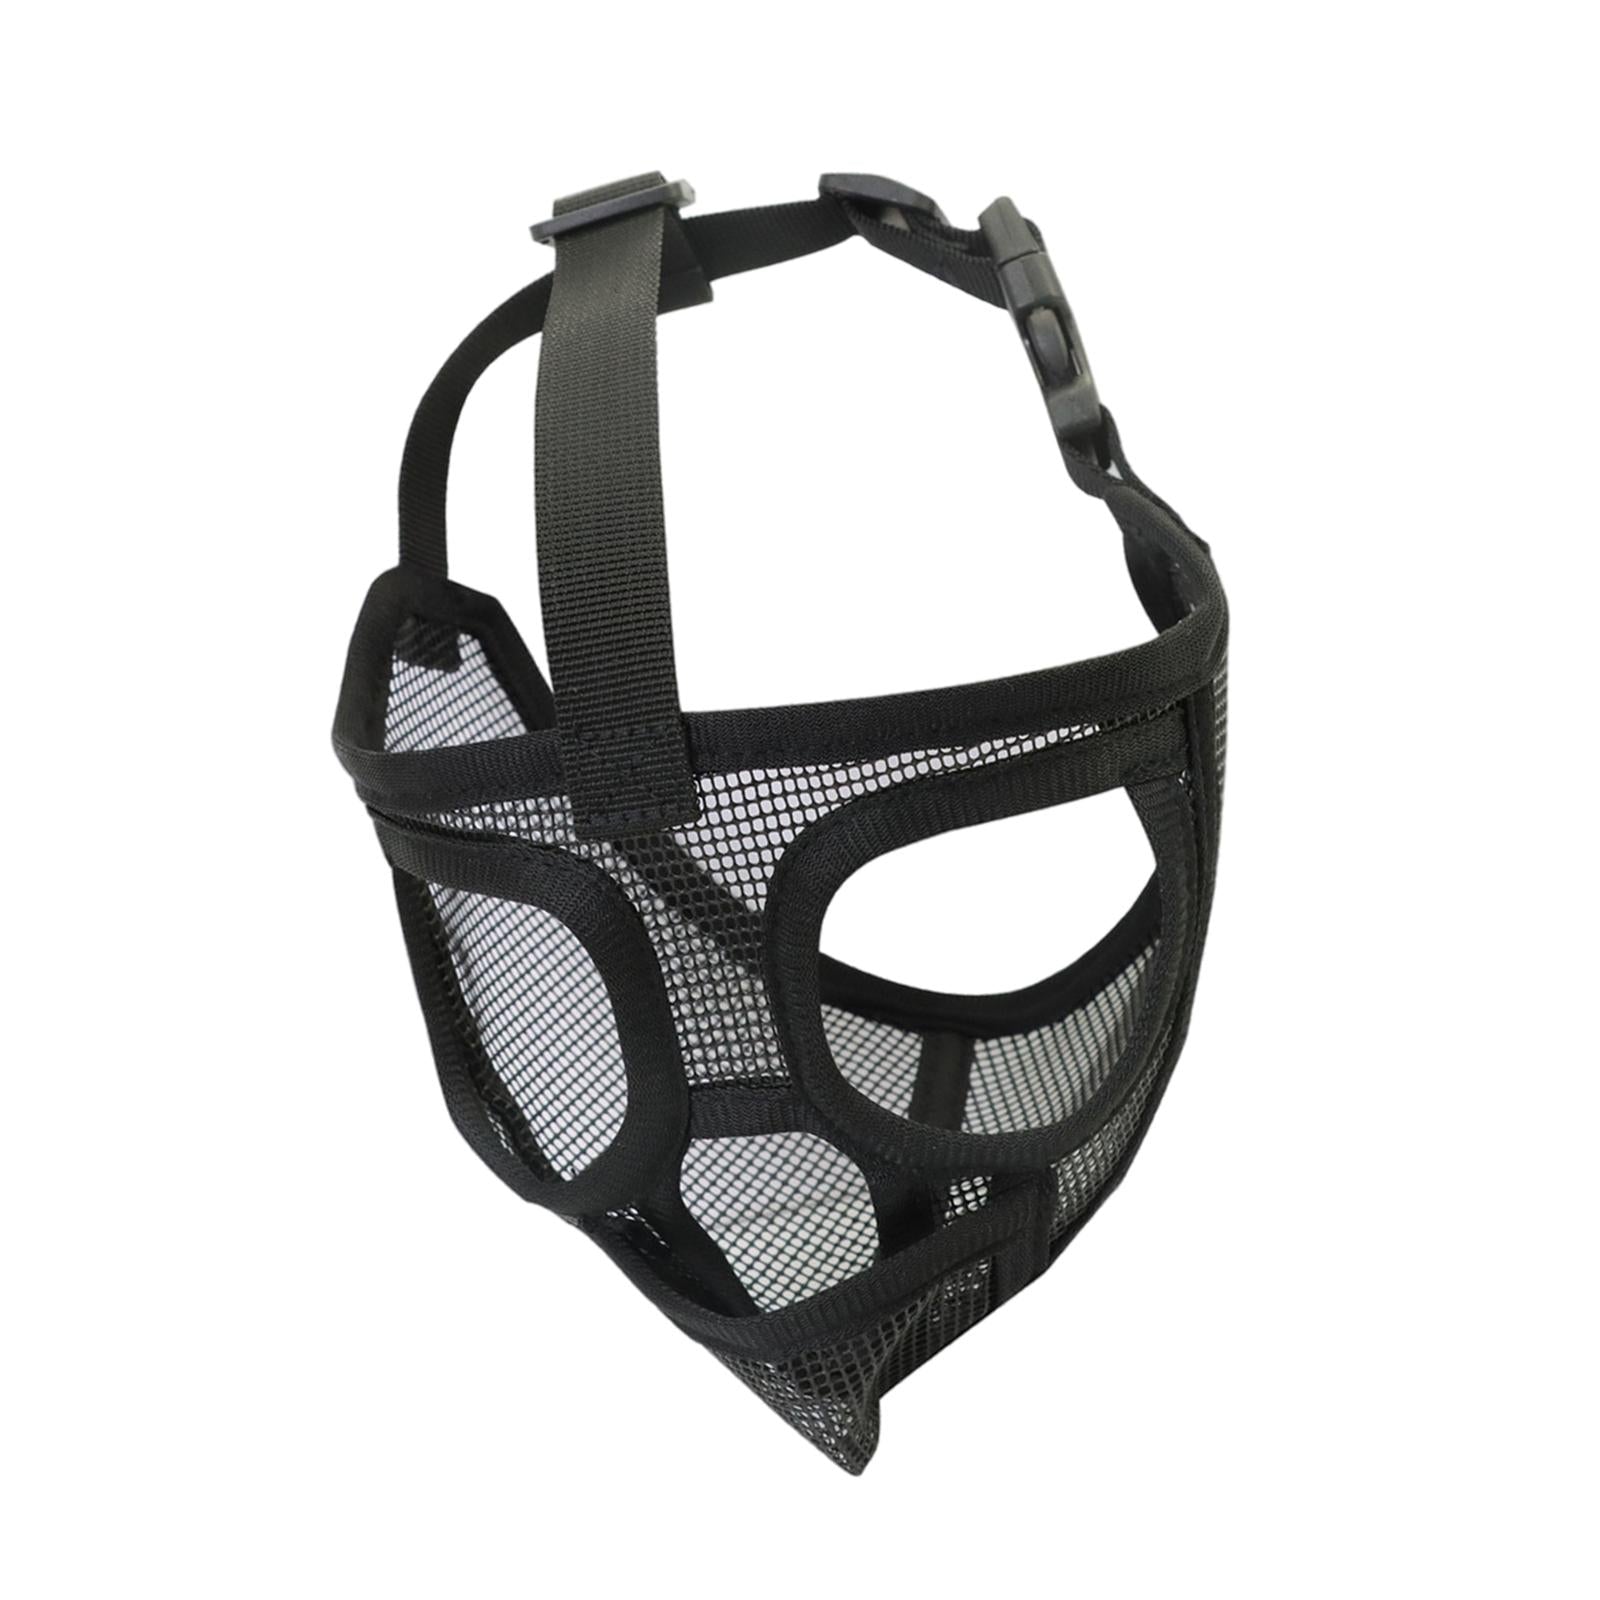 Adjustable Pet Dog Mask Anti Bark Bite Chewing Mesh Mouth Muzzle Grooming Tongue Out Black S